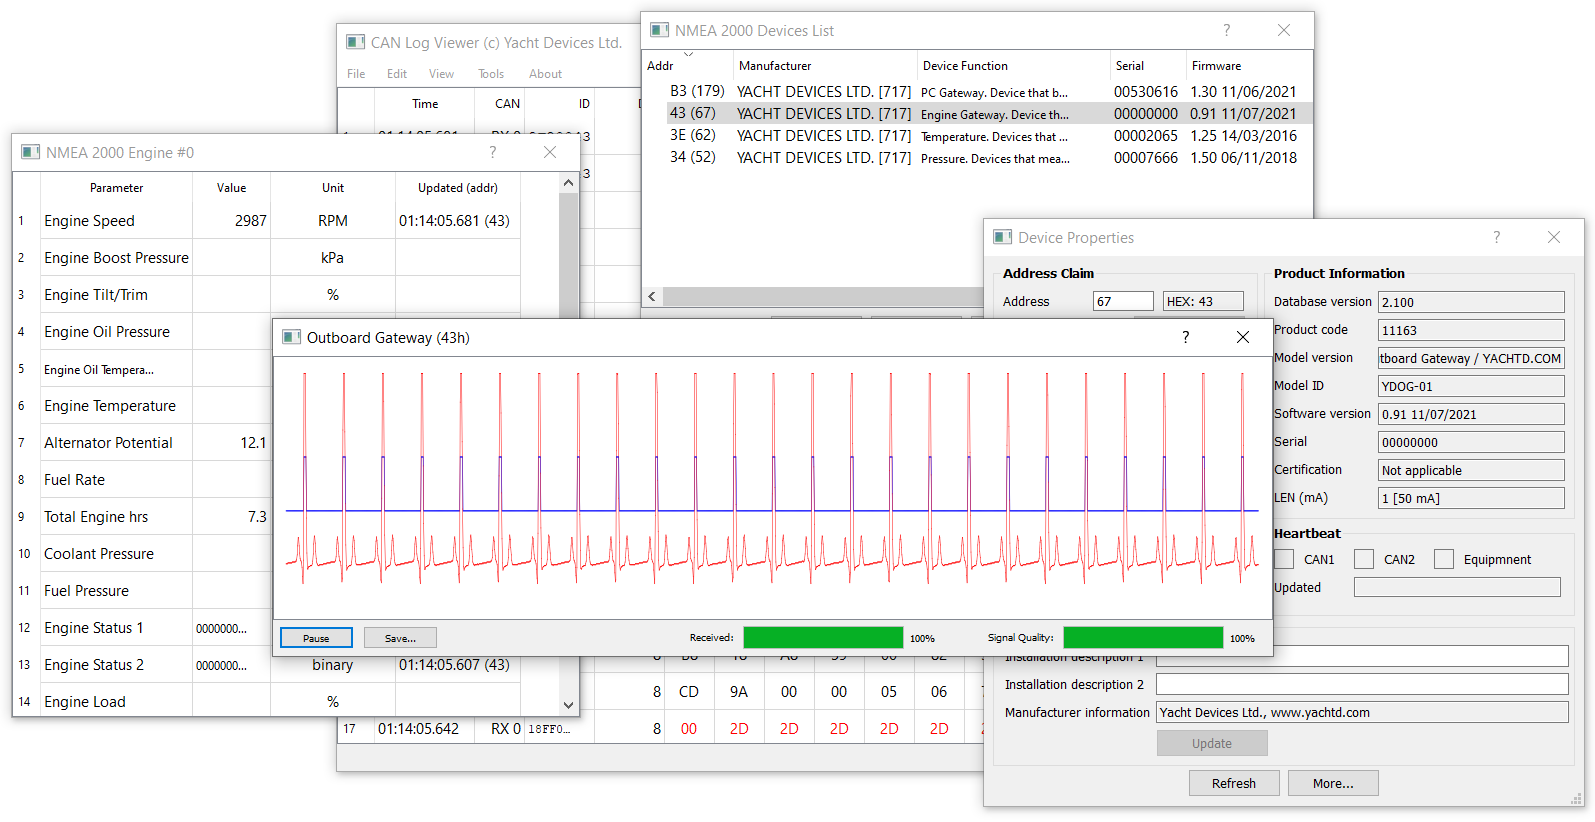 Oscillograms of the Outboard Gateway in the CAN Log Viewer